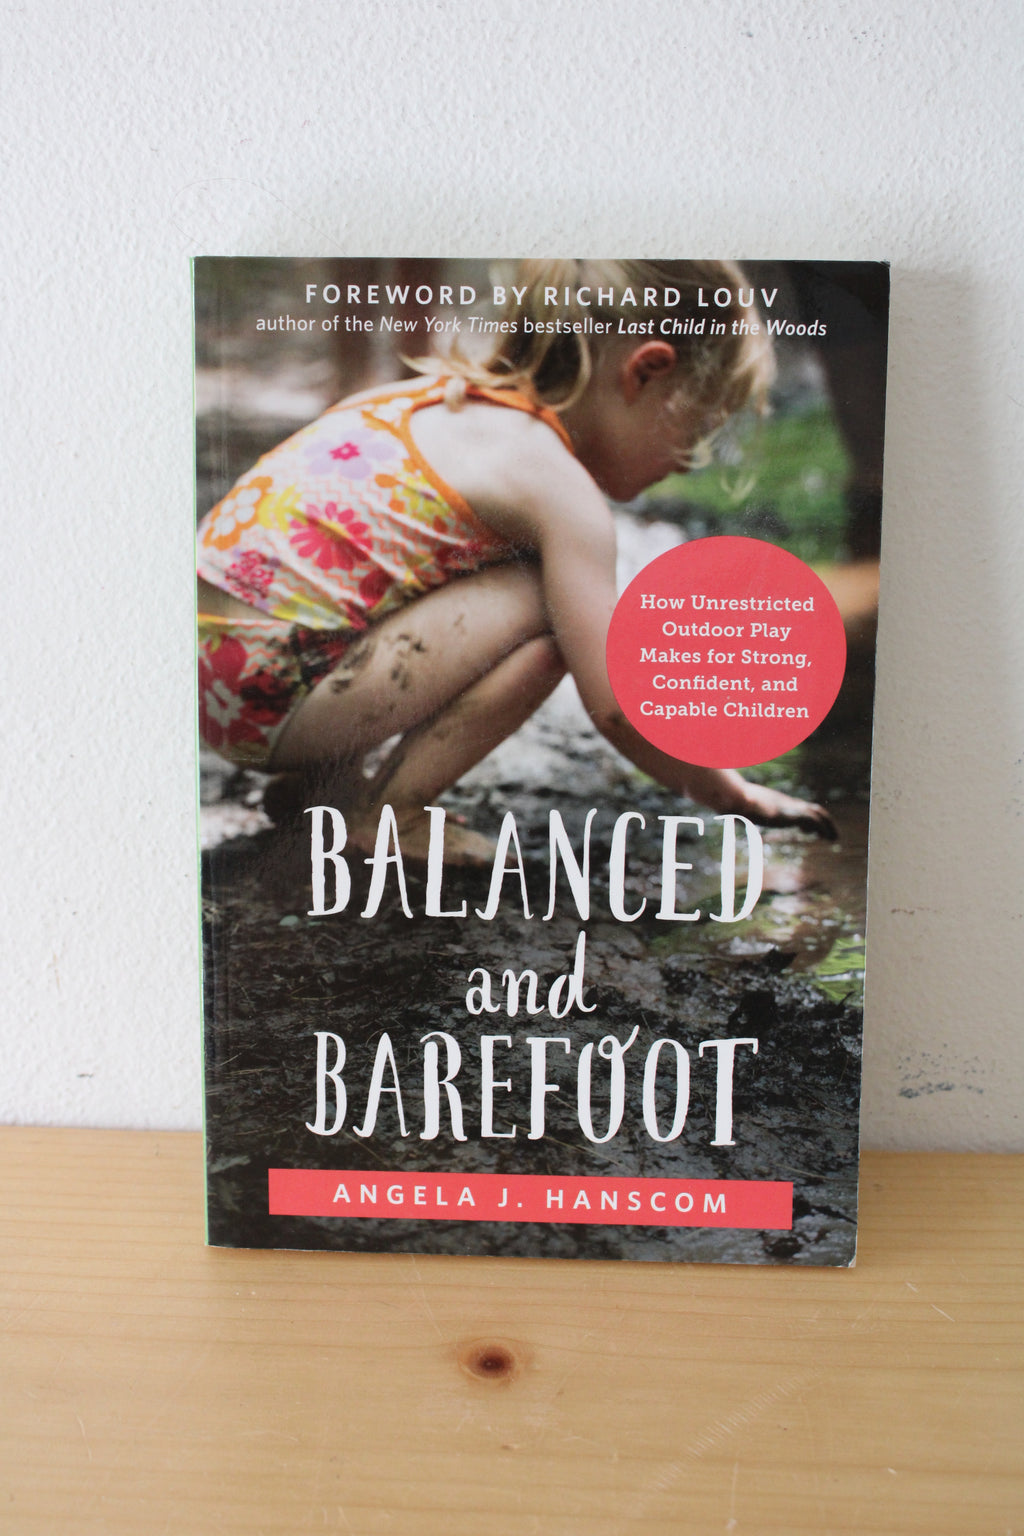 Balanced And Barefoot: How Unrestricted Outdoor Play Makes For Strong, Confident, And Capable Children. By Angela J. Hanscom